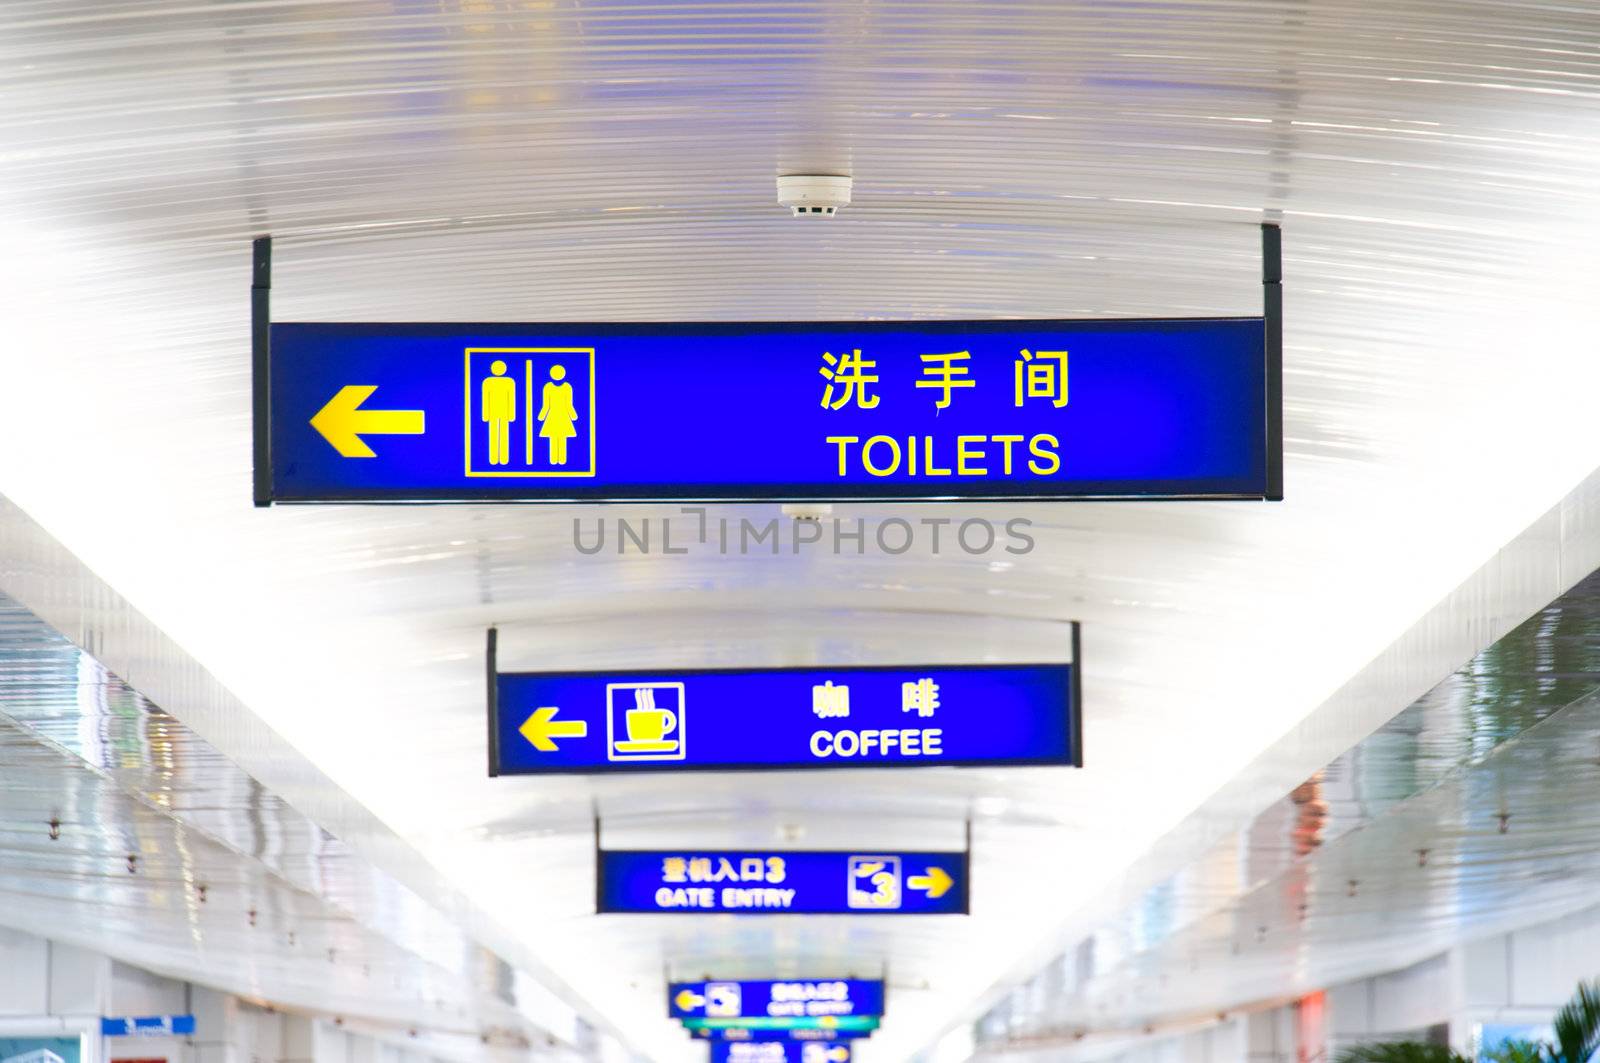 Perspective view of sign boards in airport